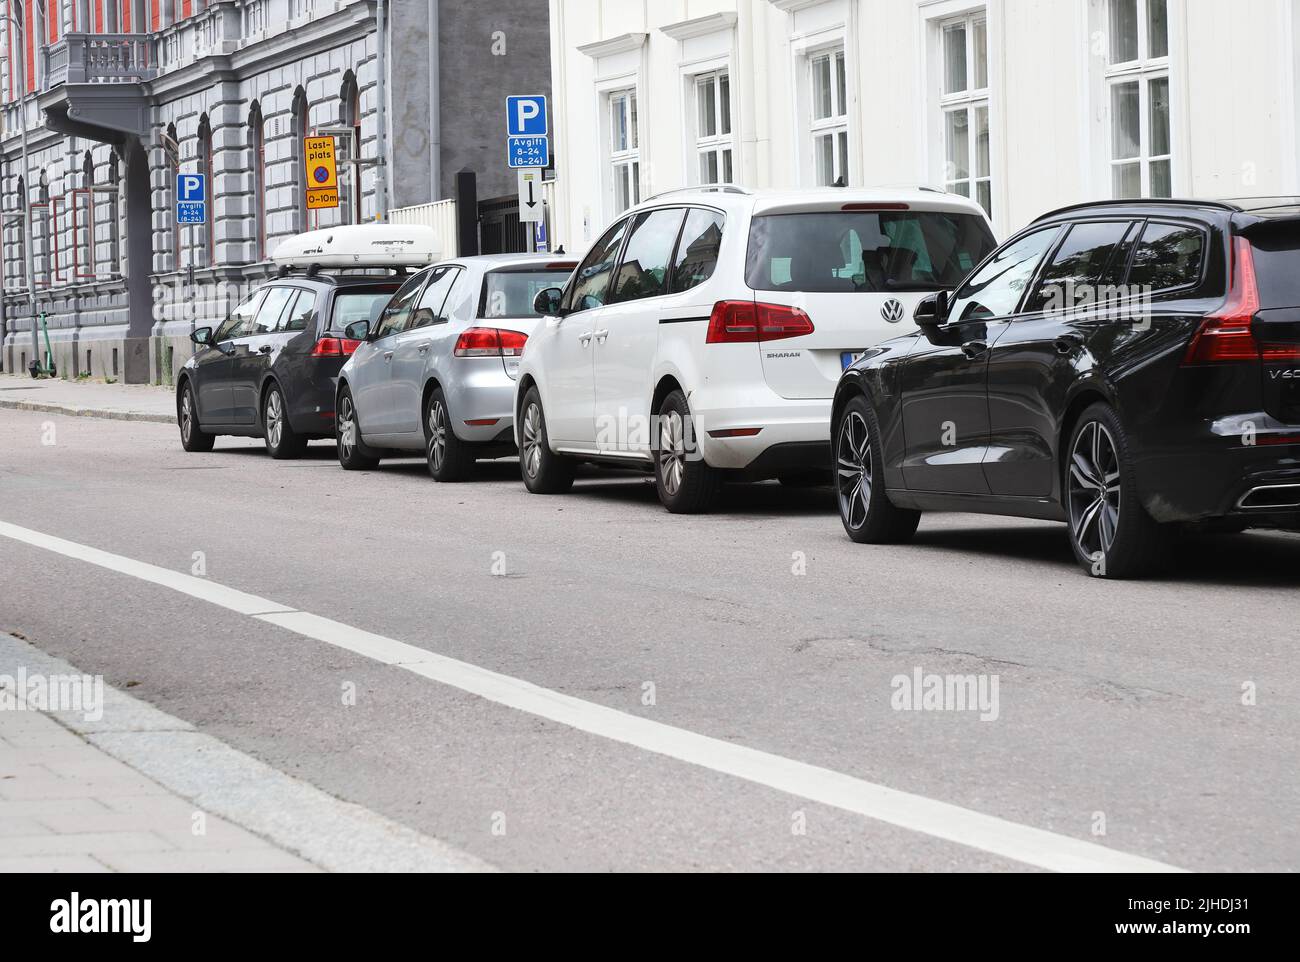 Uppsala, Sweden - July 2, 2022: Parked modern cars at the street outside residential buildings. Stock Photo